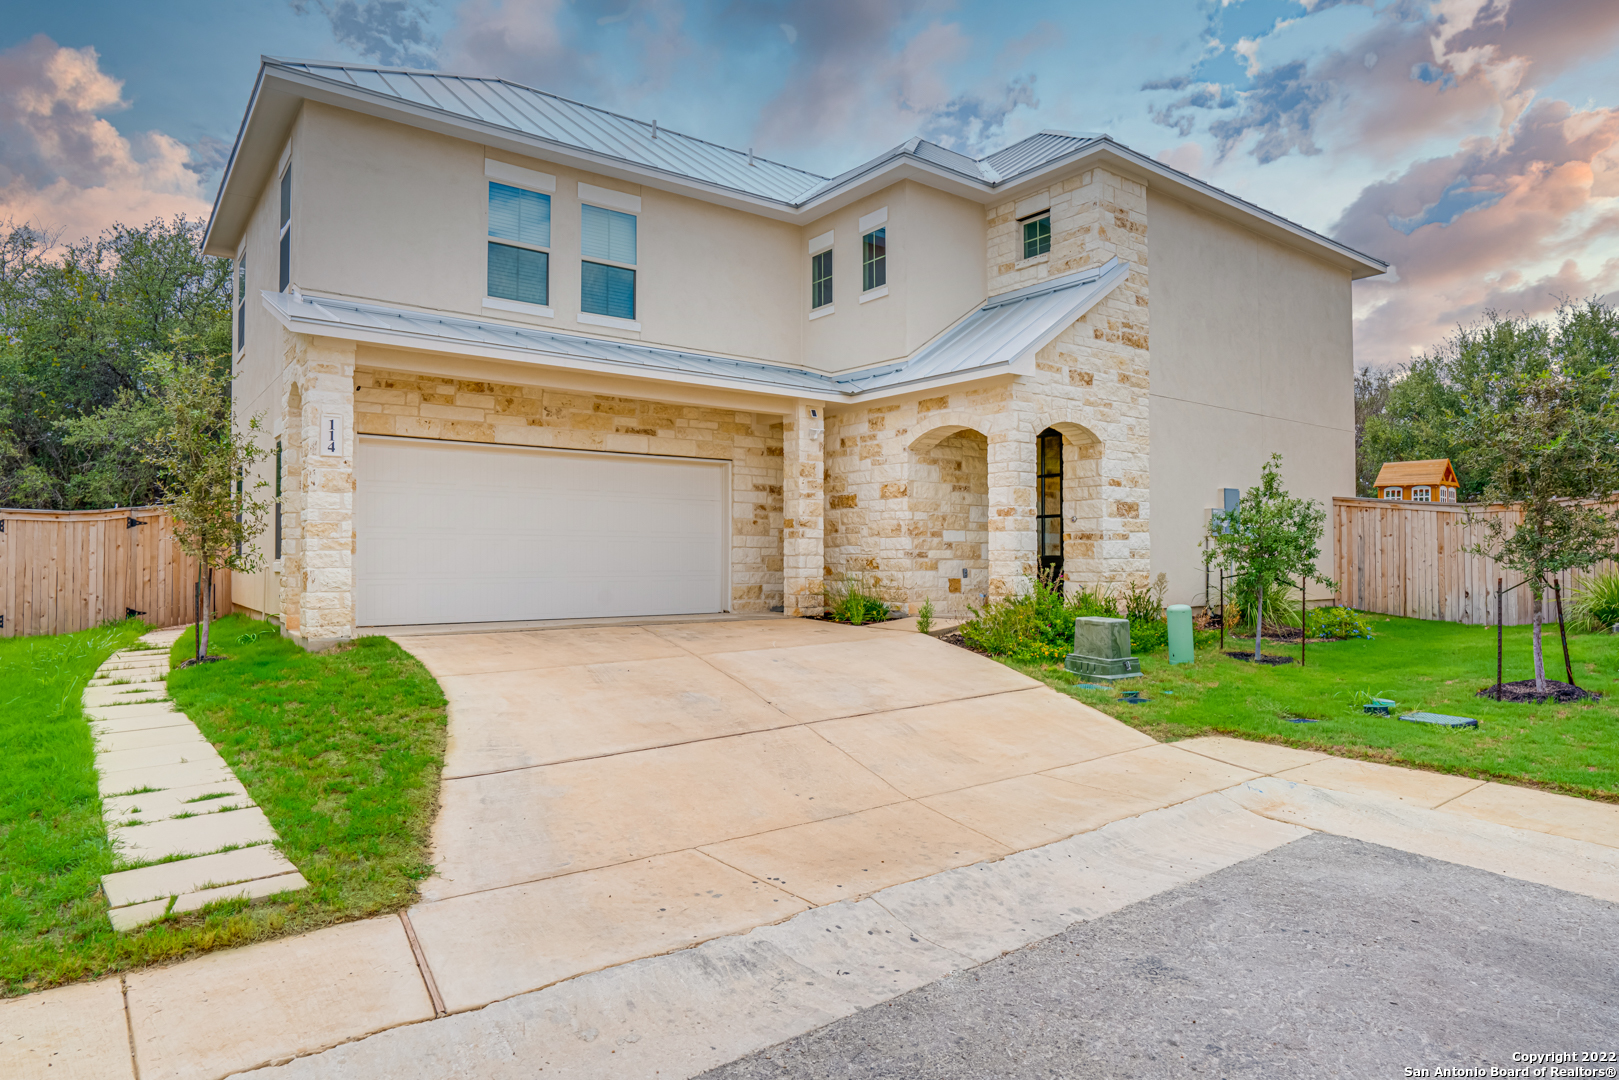 Located near Sea World and Lackland Air Force Base, this immaculate and almost brand new and lightly lived in Imagine Home is ready for its next family! This home is immaculate, well-constructed, energy efficient, and features TONS of upgrades! Enjoy entertaining in this open concept floor plan with plenty of space, neutral colors and natural light. Take your party outside to the well manicured backyard (artificial grass) with a privacy fence, playscape and ample room on the covered patio for outdoor seating, grilling and a splash in the hot tub. The kitchen boasts an oversized center island, energy efficient stainless steel appliances, granite countertops and 42" Maple, "Shaker" style cabinets. On your way upstairs to all of the bedrooms you can have a seat in a quaint reading nook or use it as a workspace. Come see this like new, modern style home with energy saving features and environmental friendly construction in a convenient location!